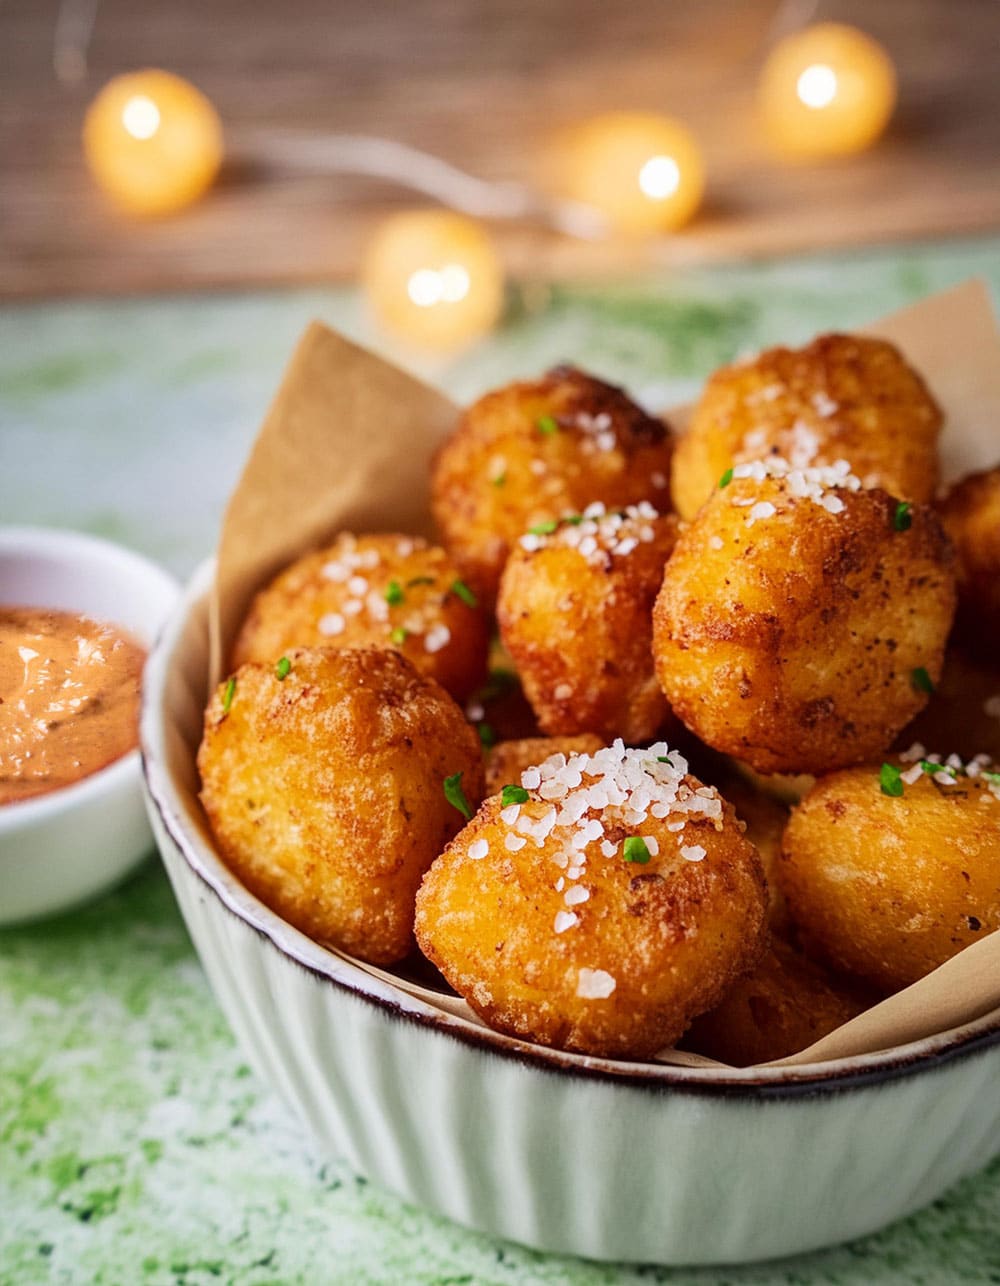 Spicy hash brown bites with chipotle dip